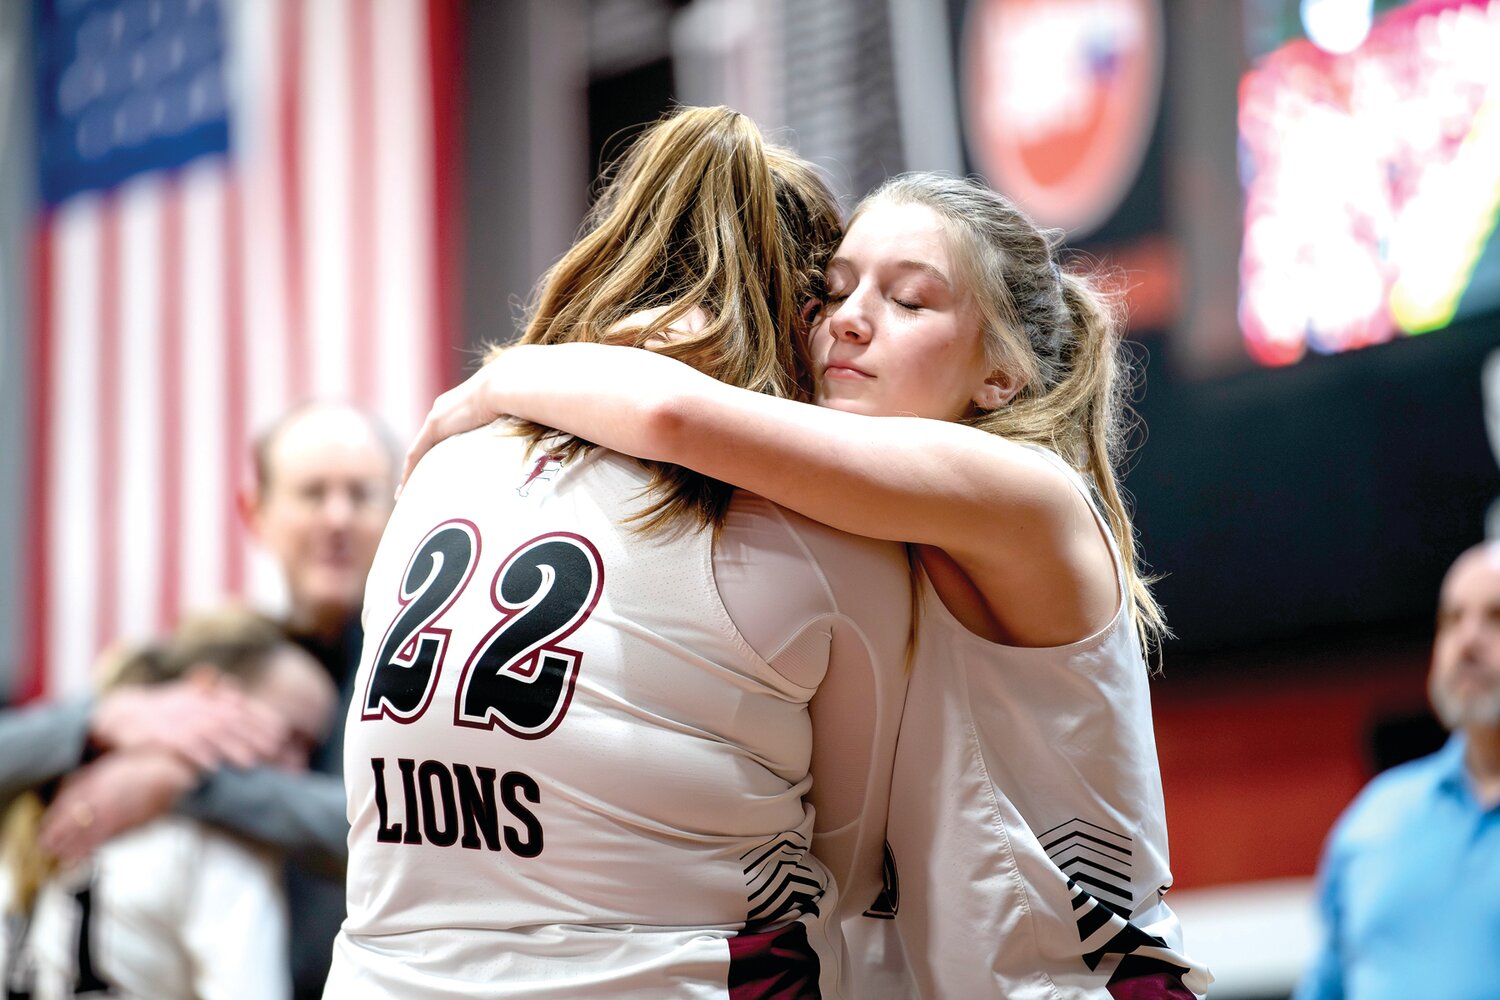 Faith Christian’s Kendal Robison gets a hug from teammate Kylie Personett after a 38-35 playoff loss.